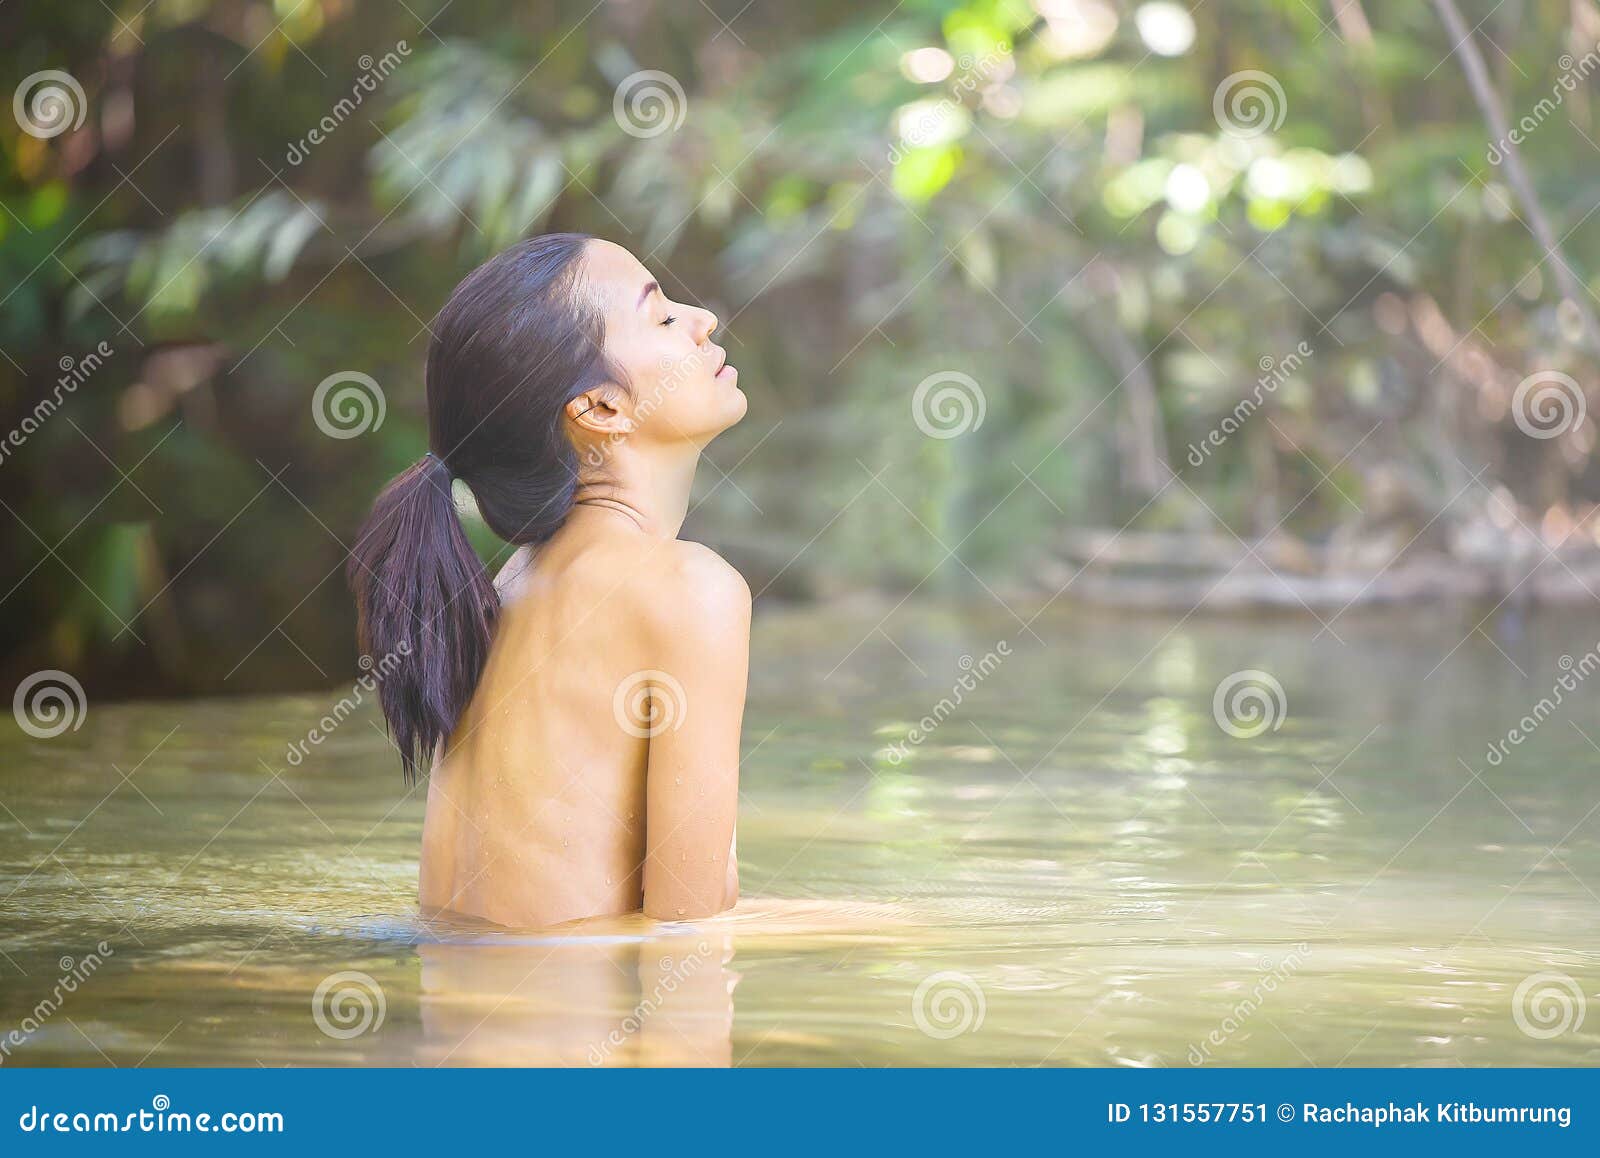 Watch her bathe her amazing girl body in the water